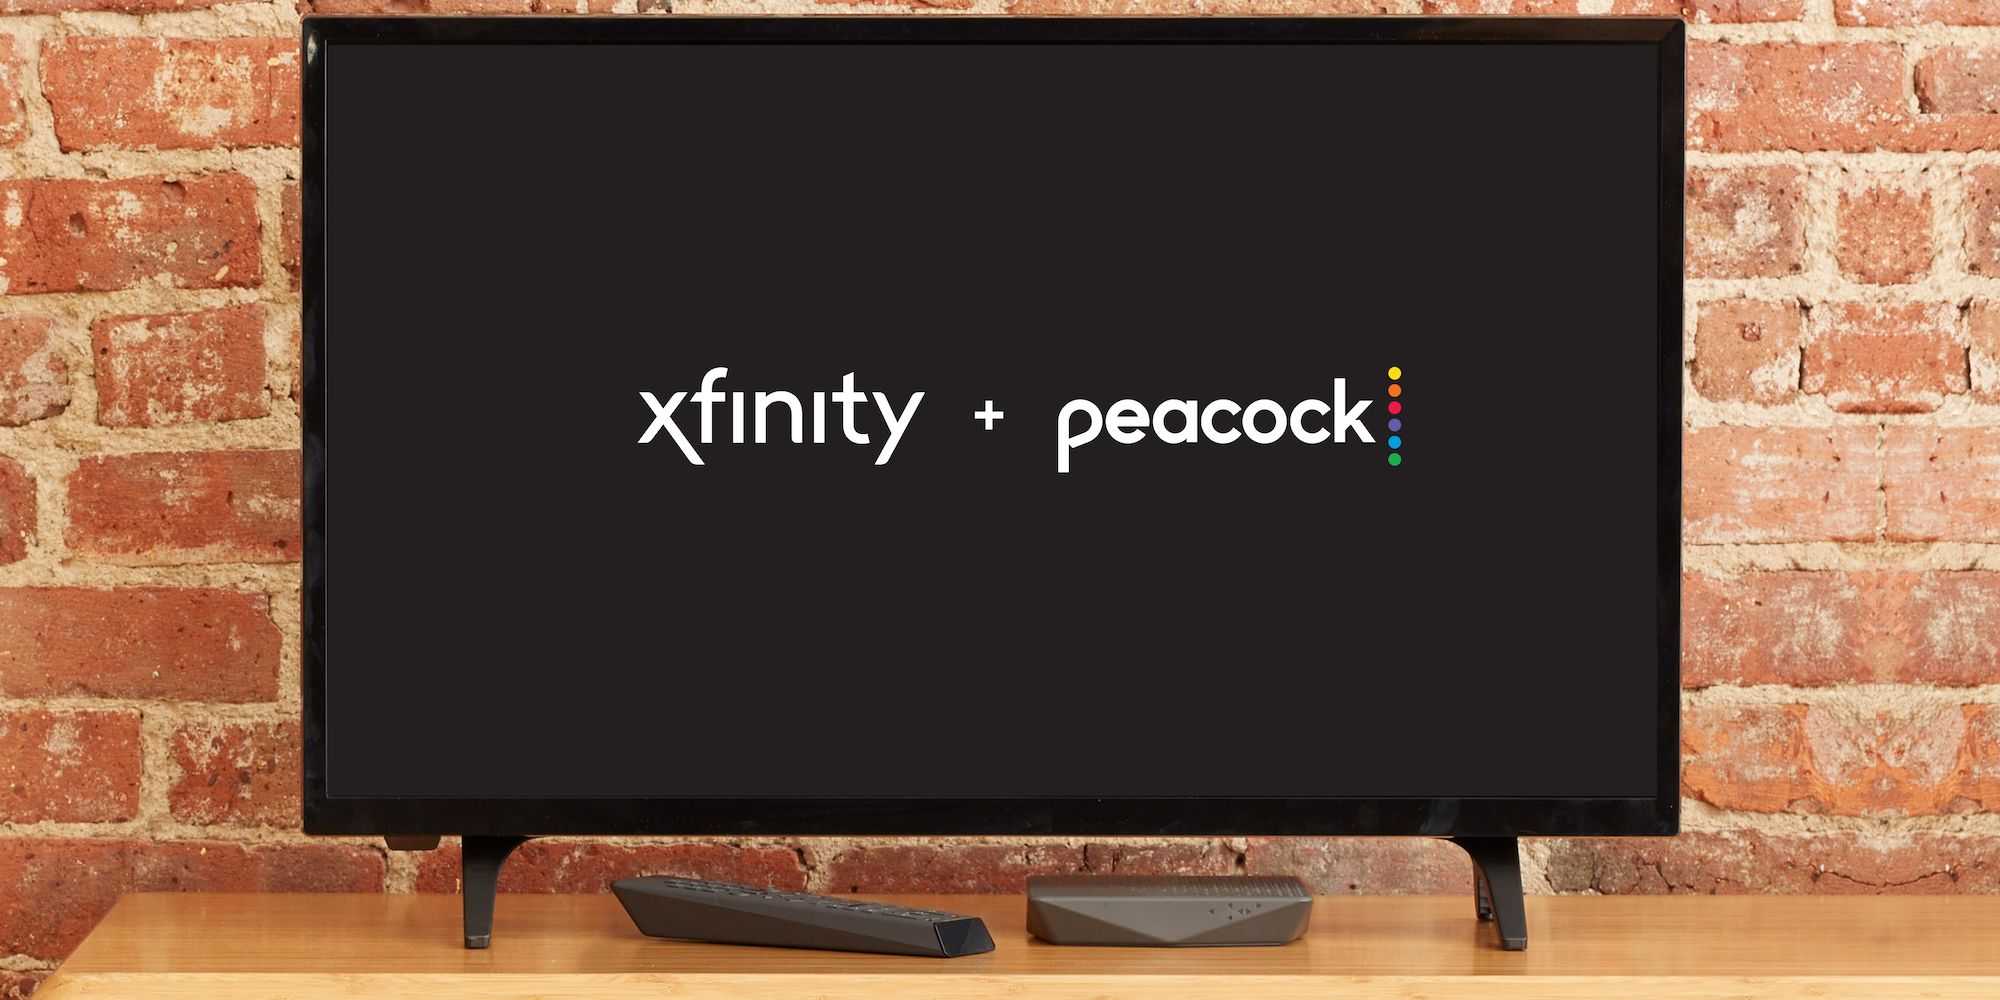 Xfinity and Peacock on a TV screen